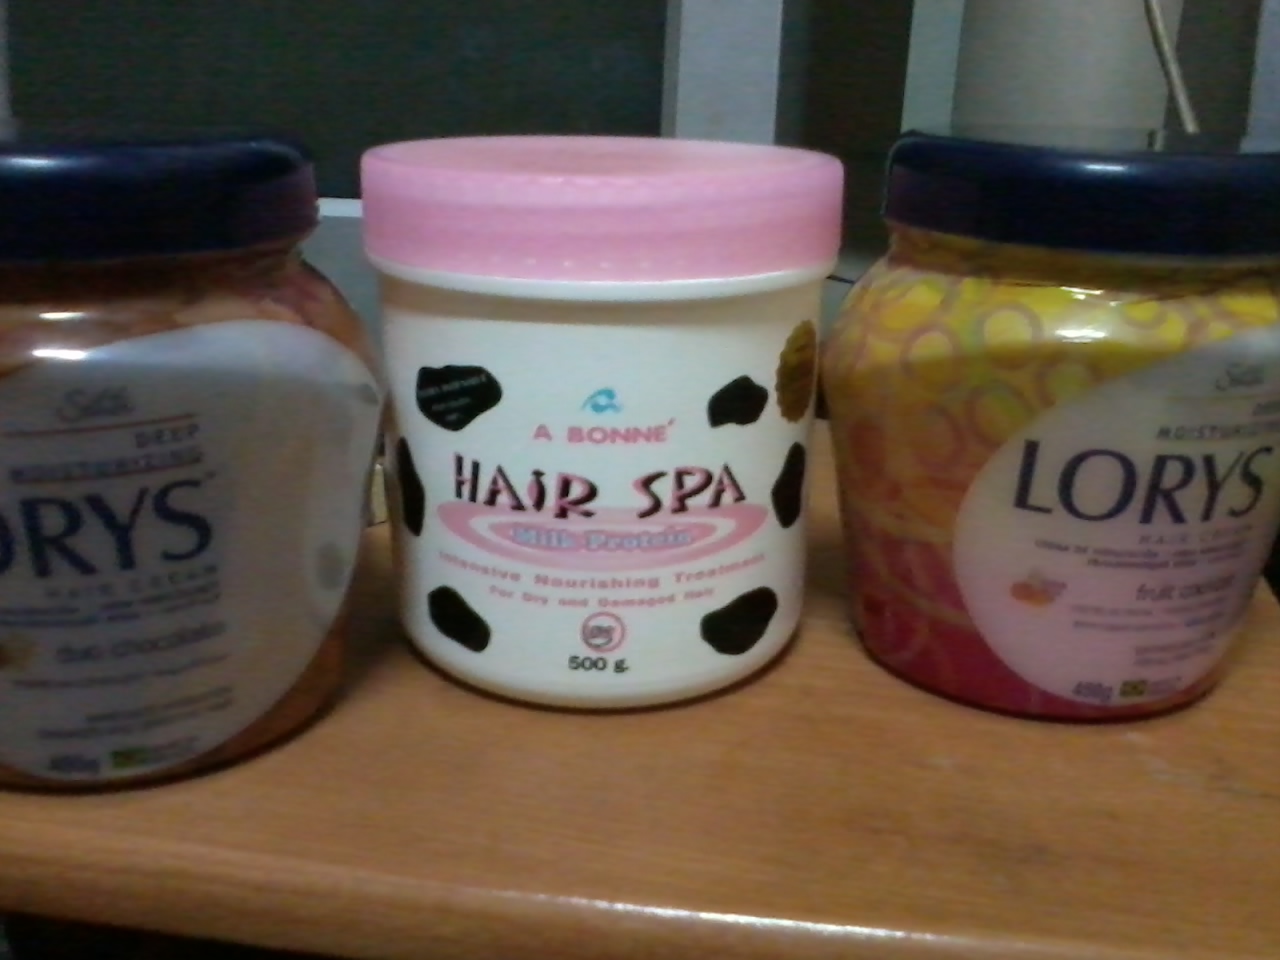 Lorys Hair Cream and A Bonne Hair Spa - celebraTINg exisTENce